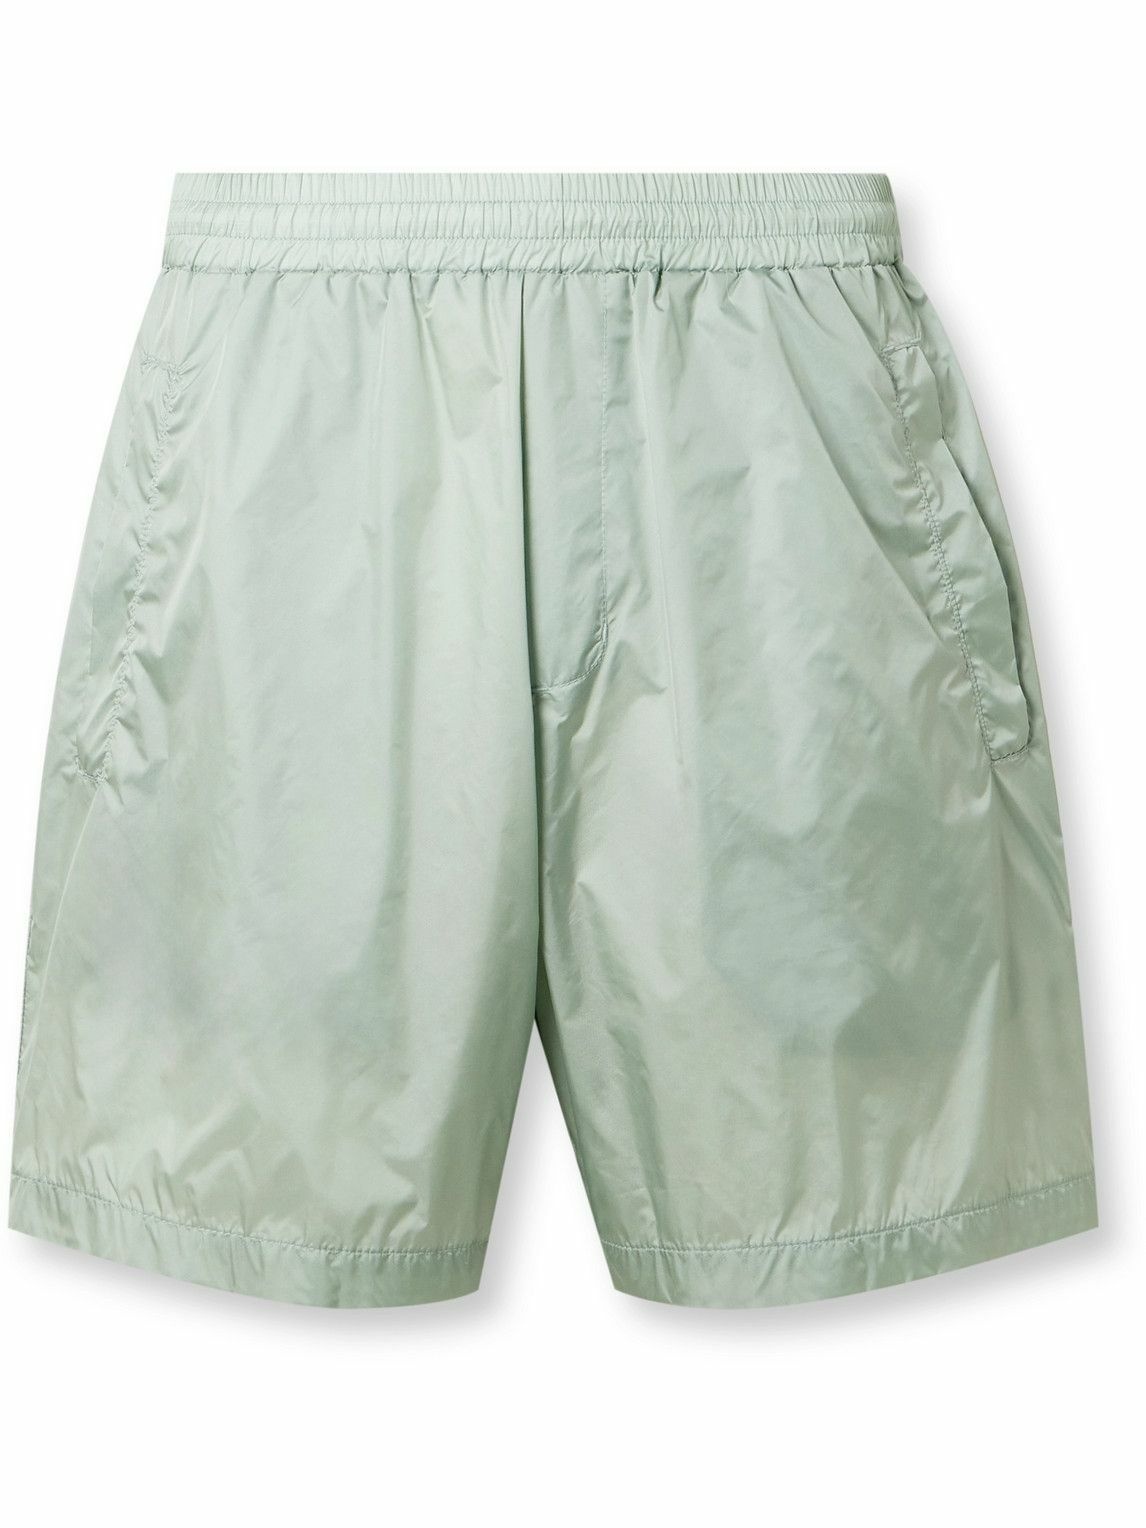 ON Pace Straight-Leg Layered CleanCloud® Shorts for Men